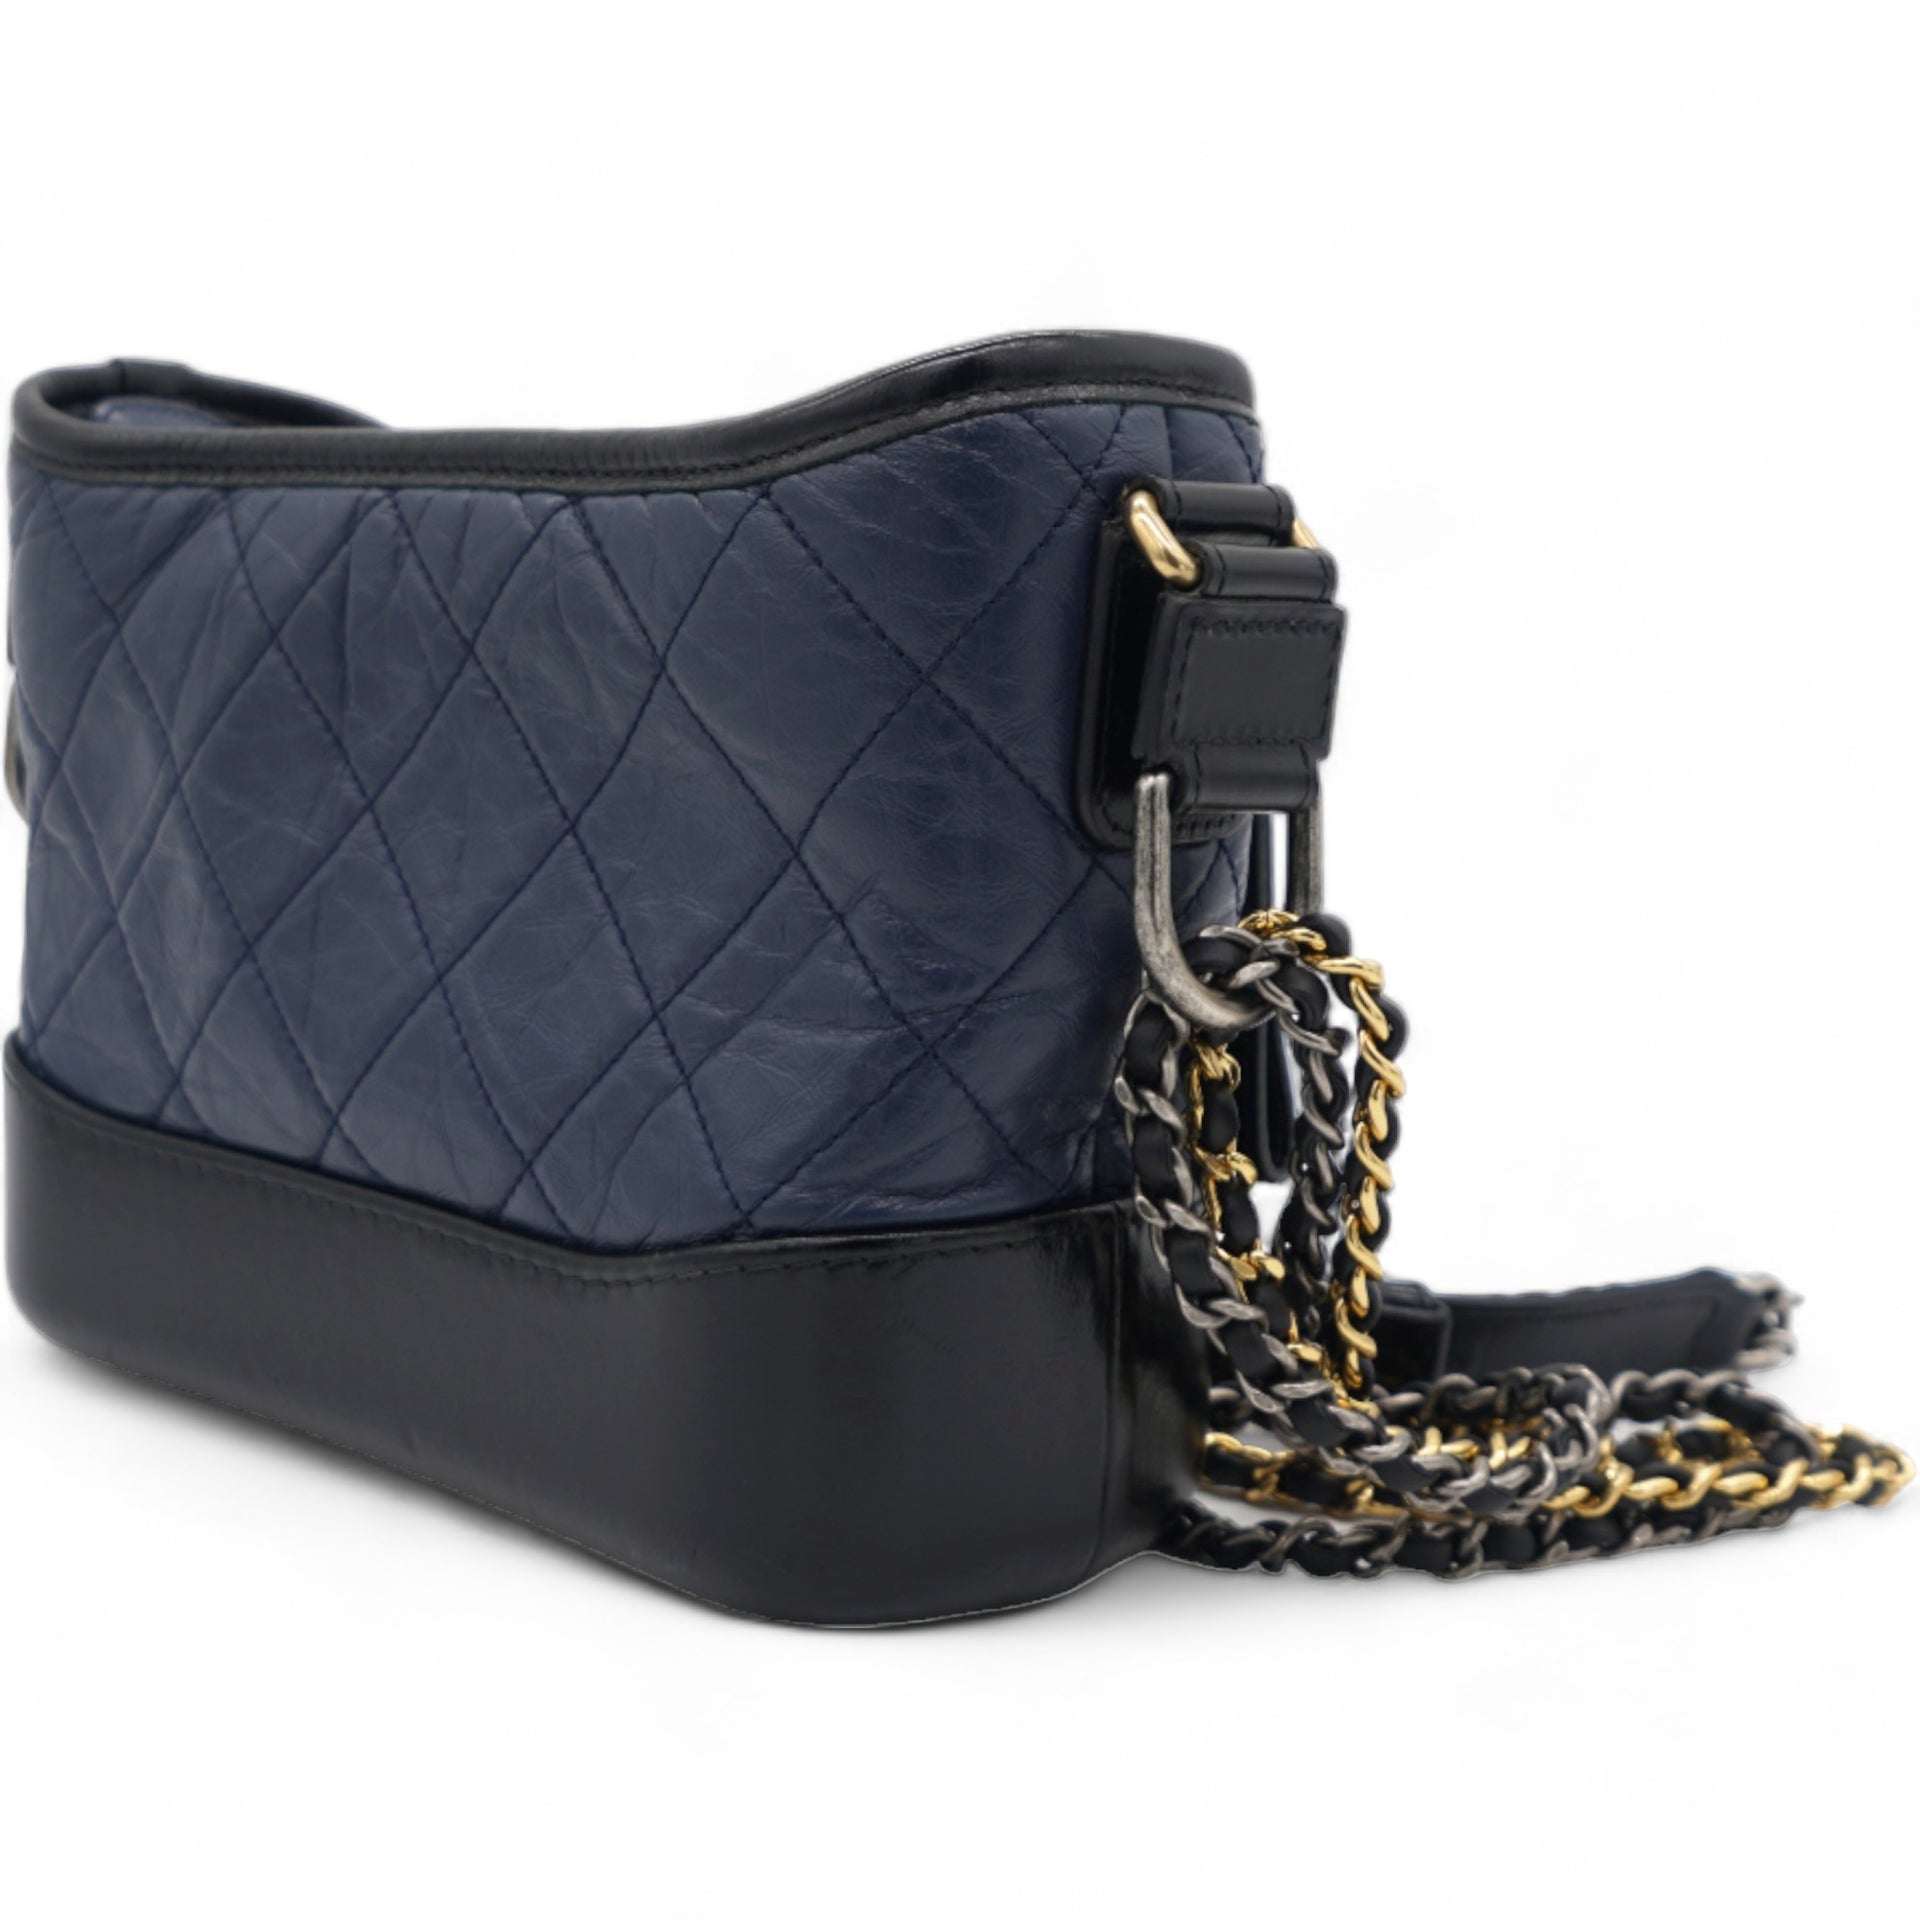 Aged Calfskin Quilted Small Gabrielle Hobo